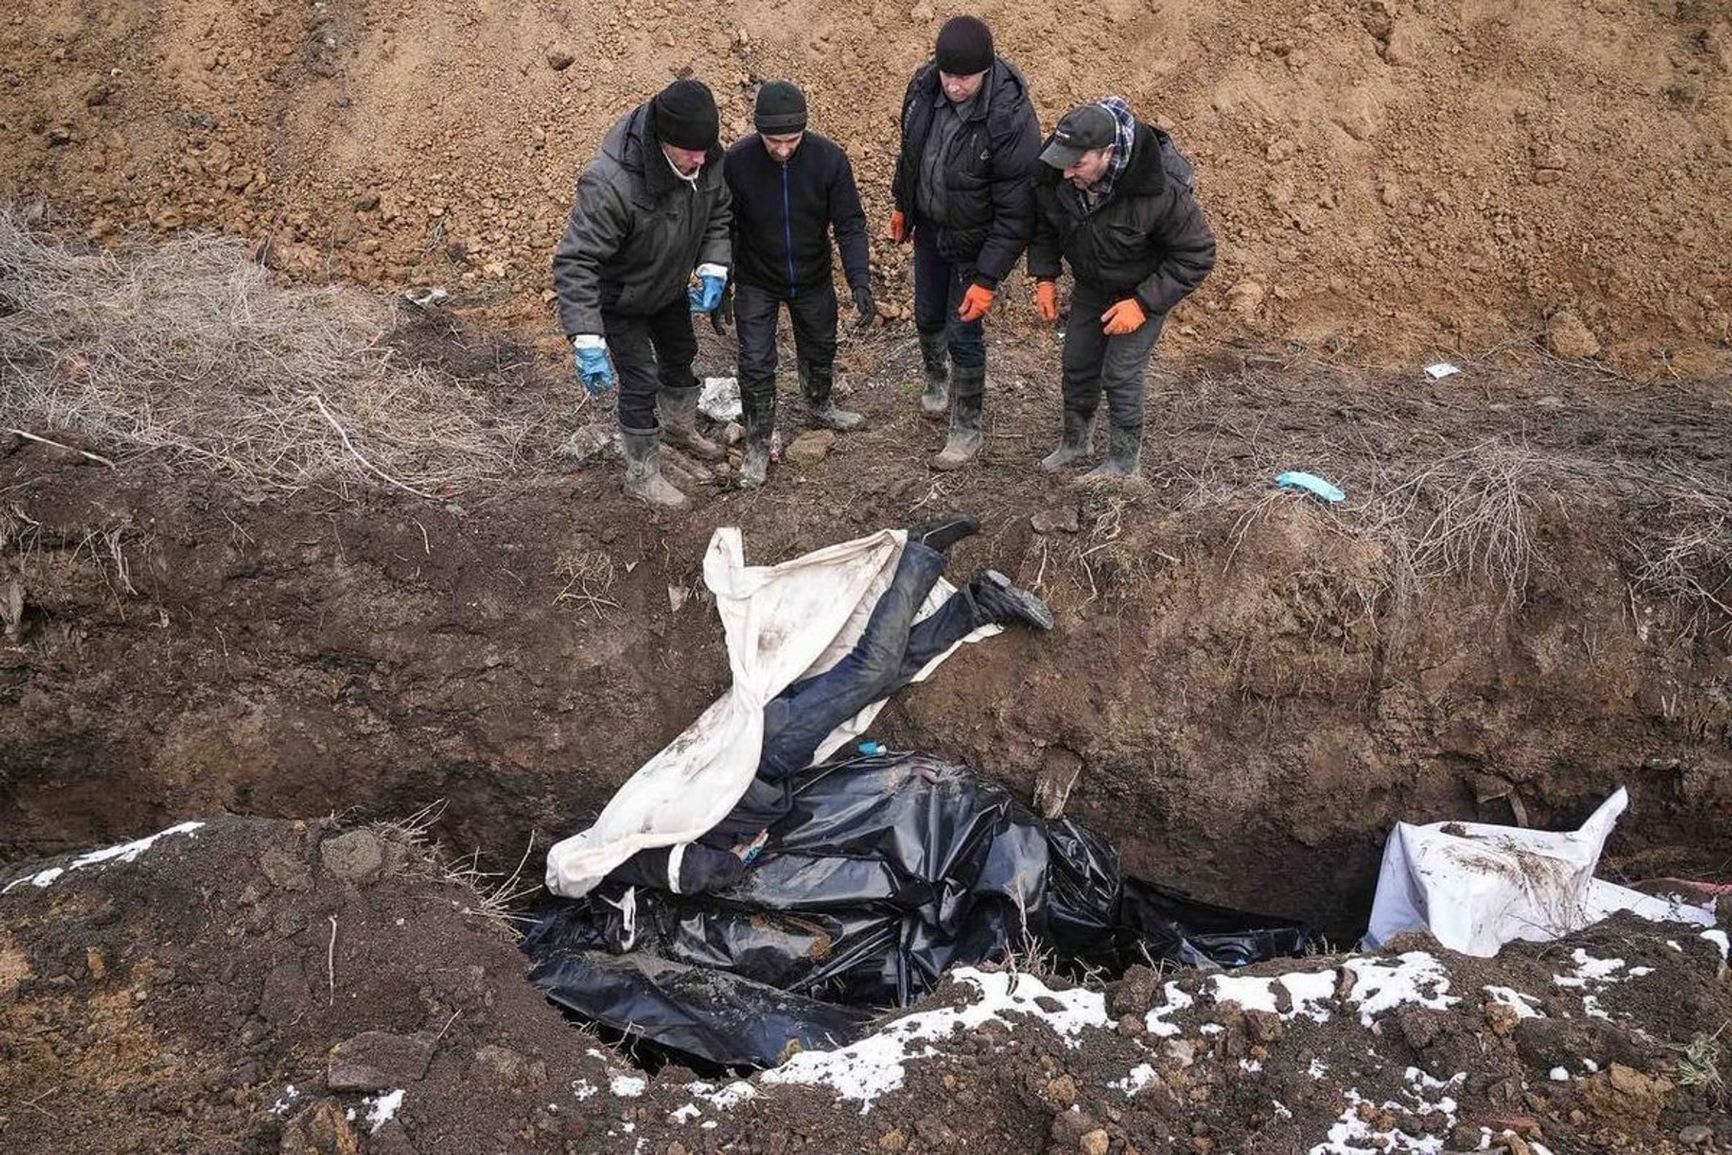 A mass grave in Mariupol